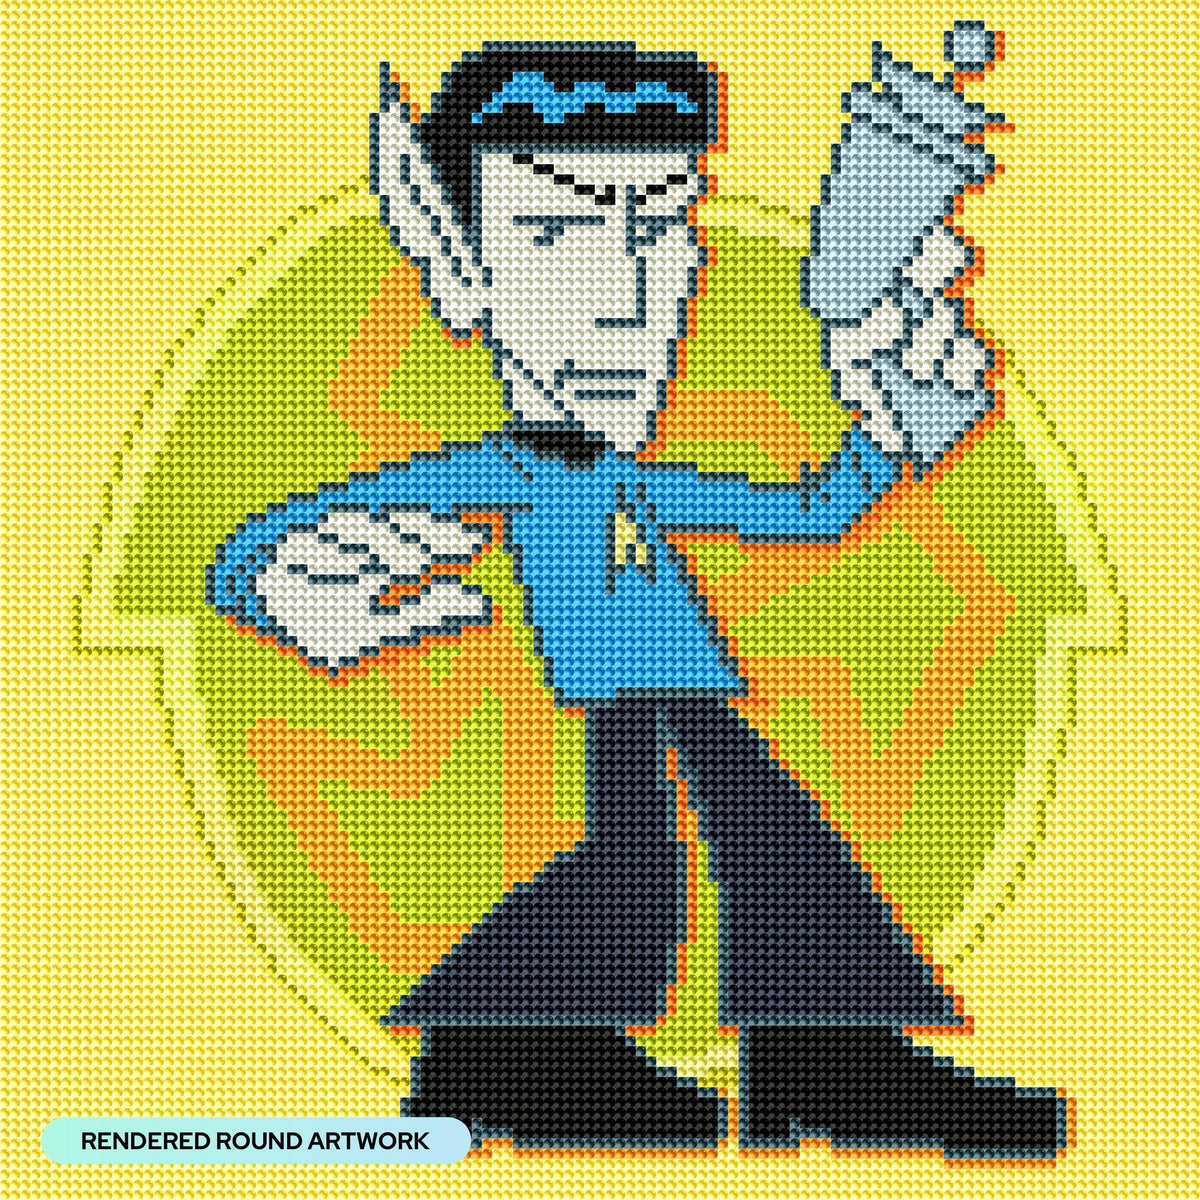 Diamond Painting Spock 13" x 13" (32.8cm x 32.8cm) / Round with 10 Colors Including 2 ABs / 13,689